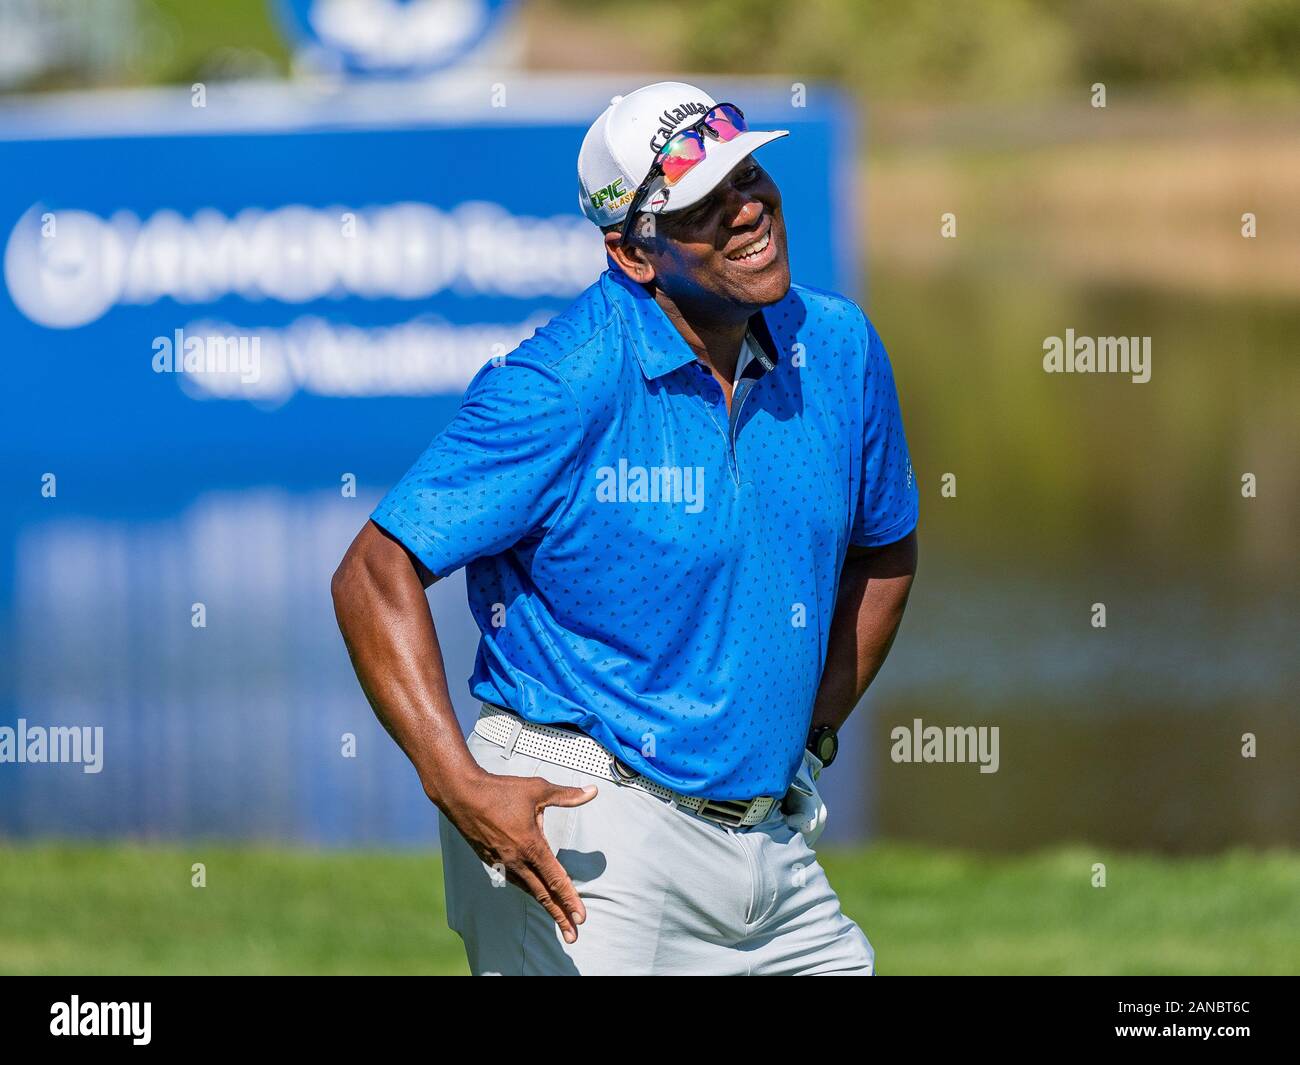 Lake Buena Vista Fl Usa 16th Jan 2020 Former Mlb Player Joe Carter Reacts To His Shot Onto The 18th Green During 1st Round Of Diamond Resorts Tournament Of Champions Presented By